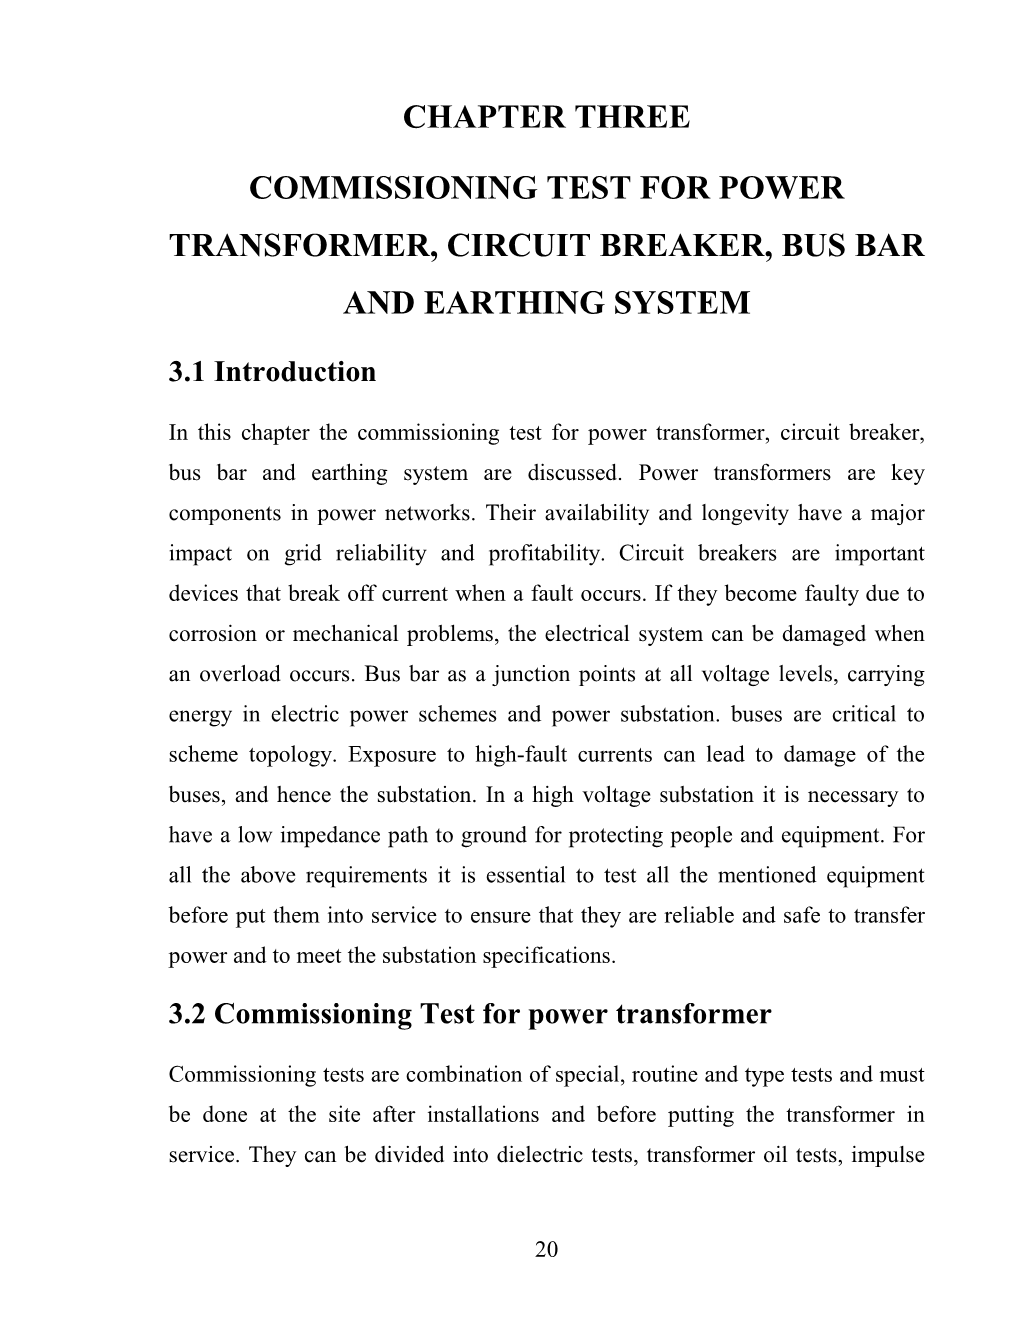 Chapter Three Commissioning Test for Power Transformer, Circuit Breaker, Bus Bar and Earthing System